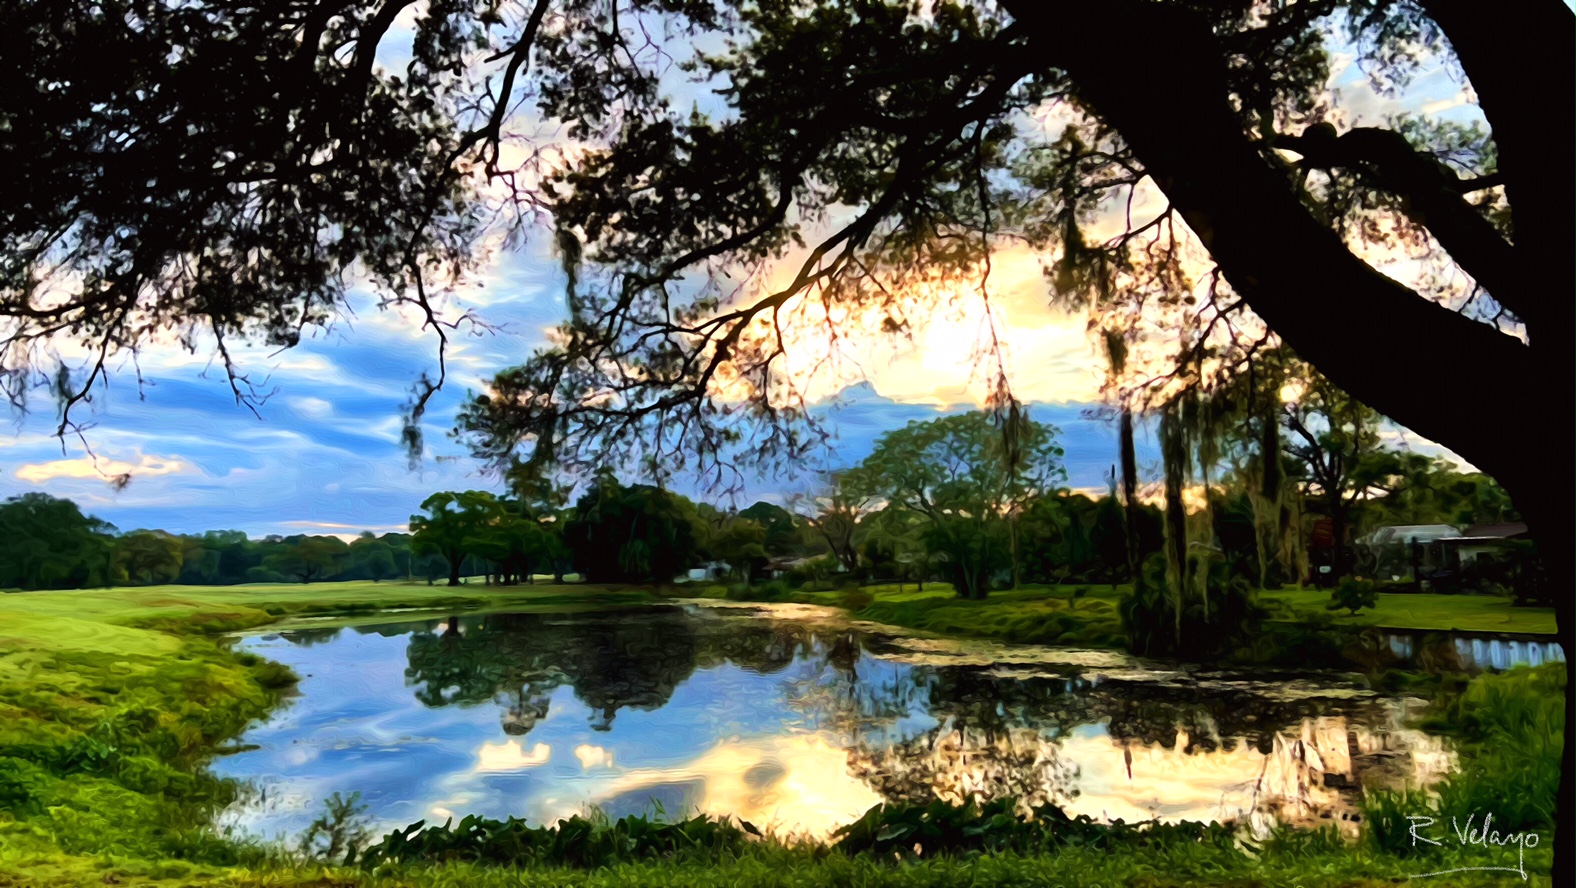 "CLOUDY SUNRISE BY THE POND BEHIND CASABLANCA CONDO" [Created: 4/17/2022]